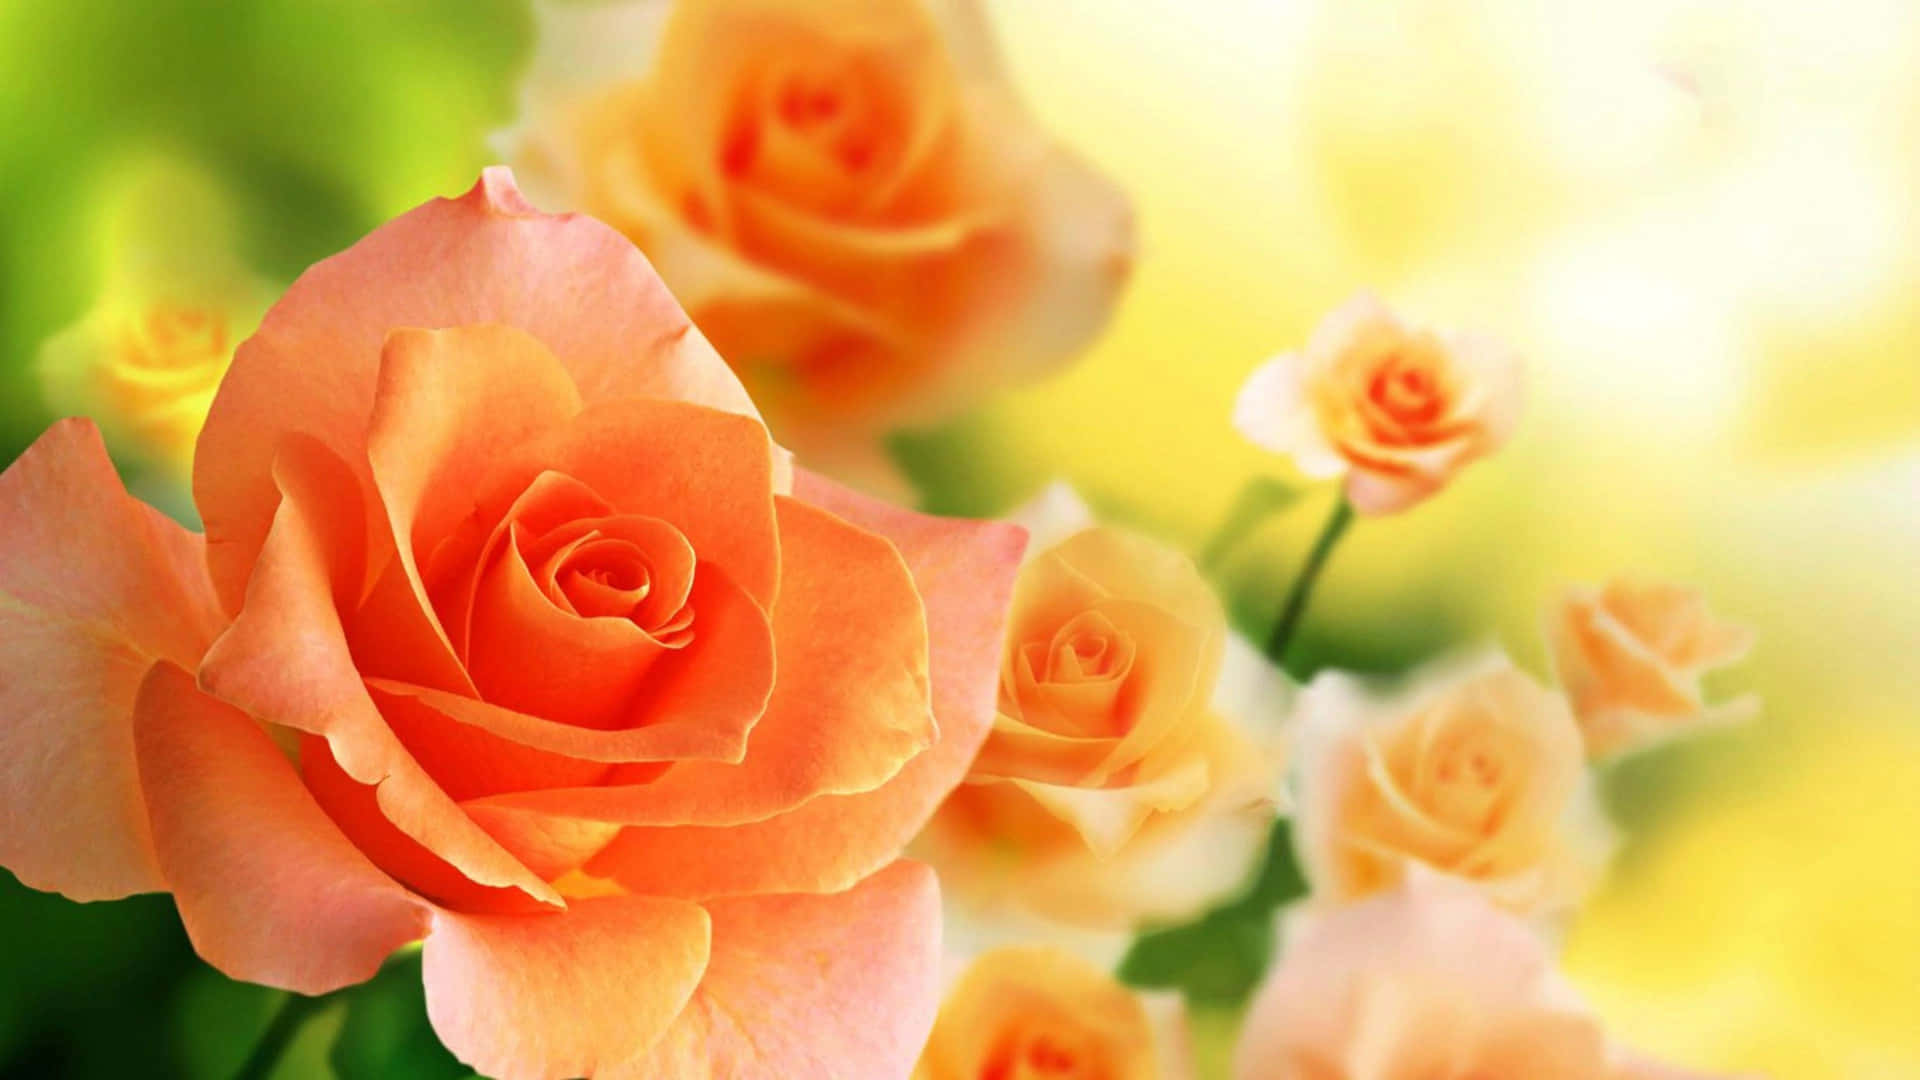 Orange Roses On A Green Background